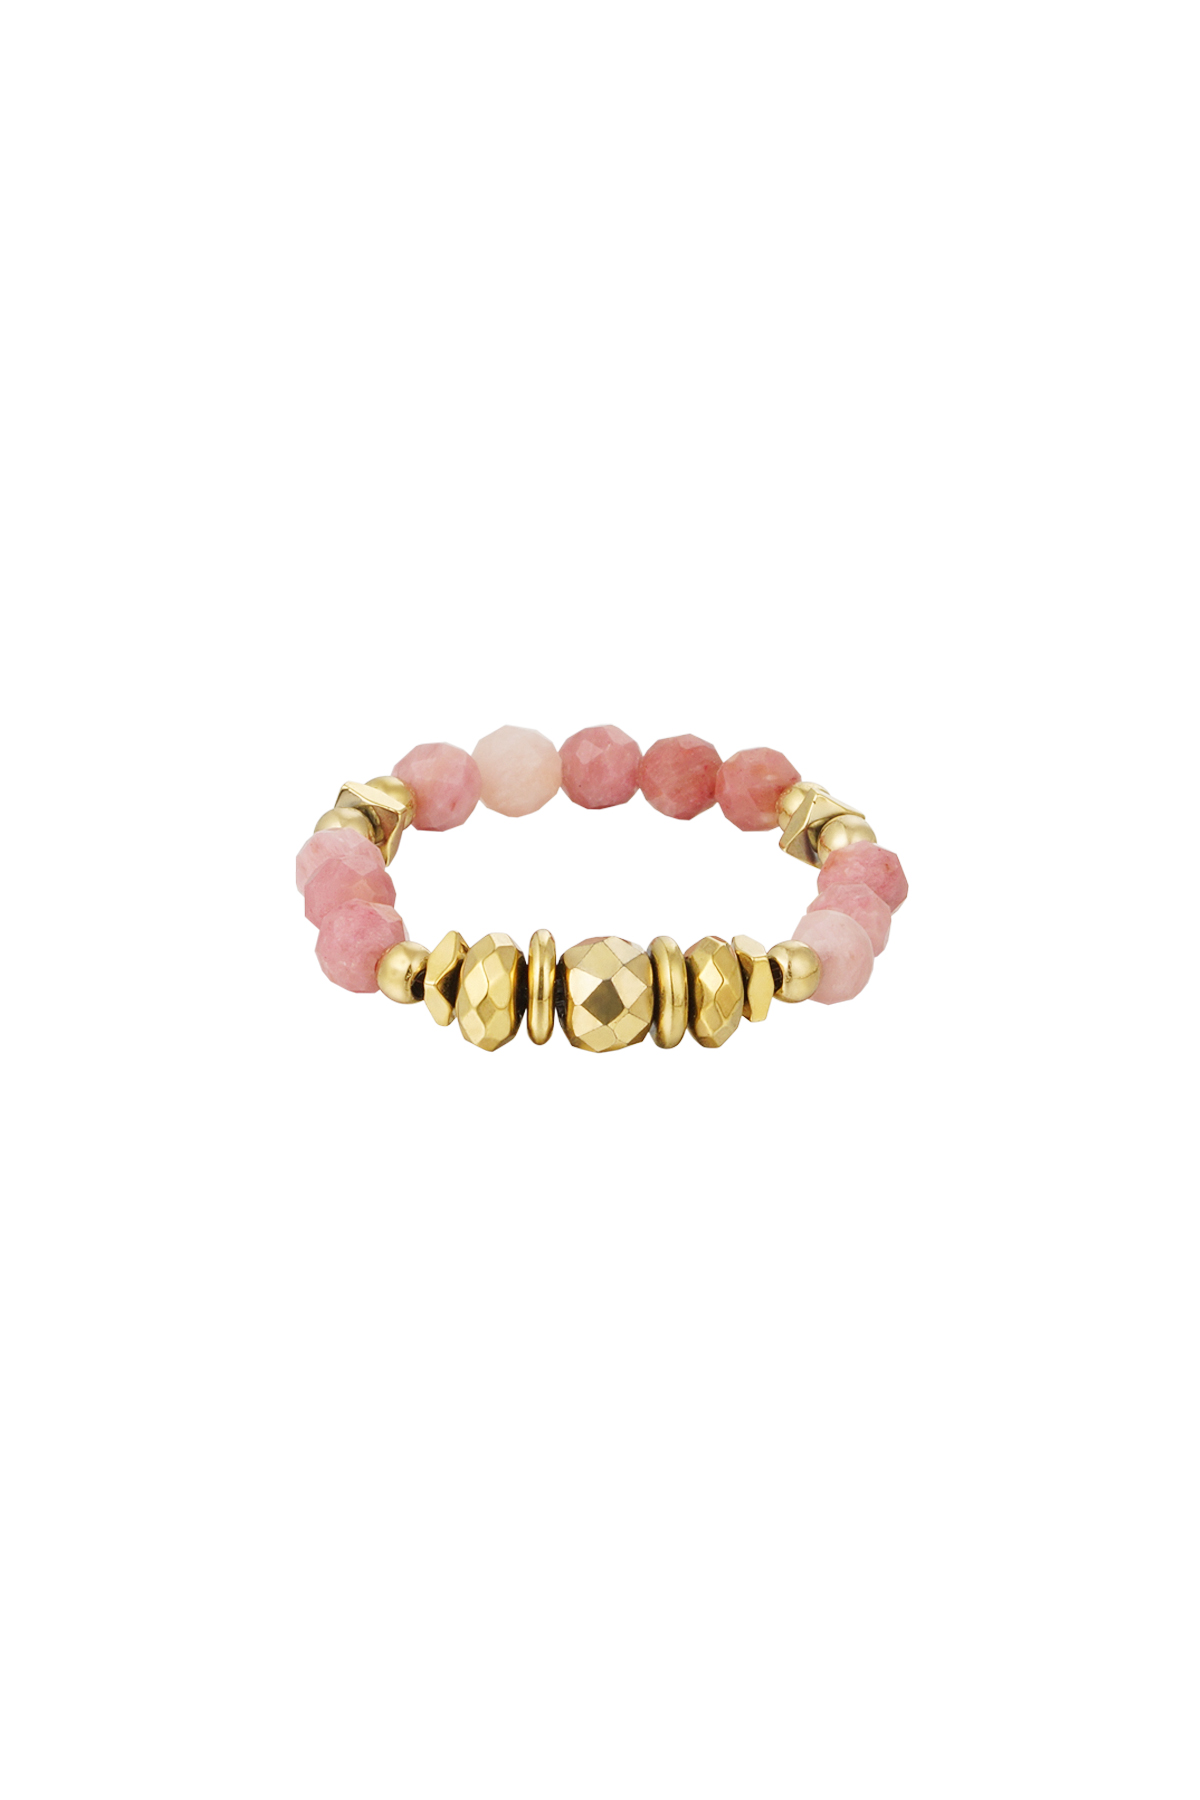 Ring steentjes - Natuurstenen collectie - goud/roze Pink &amp; Gold Stone One size